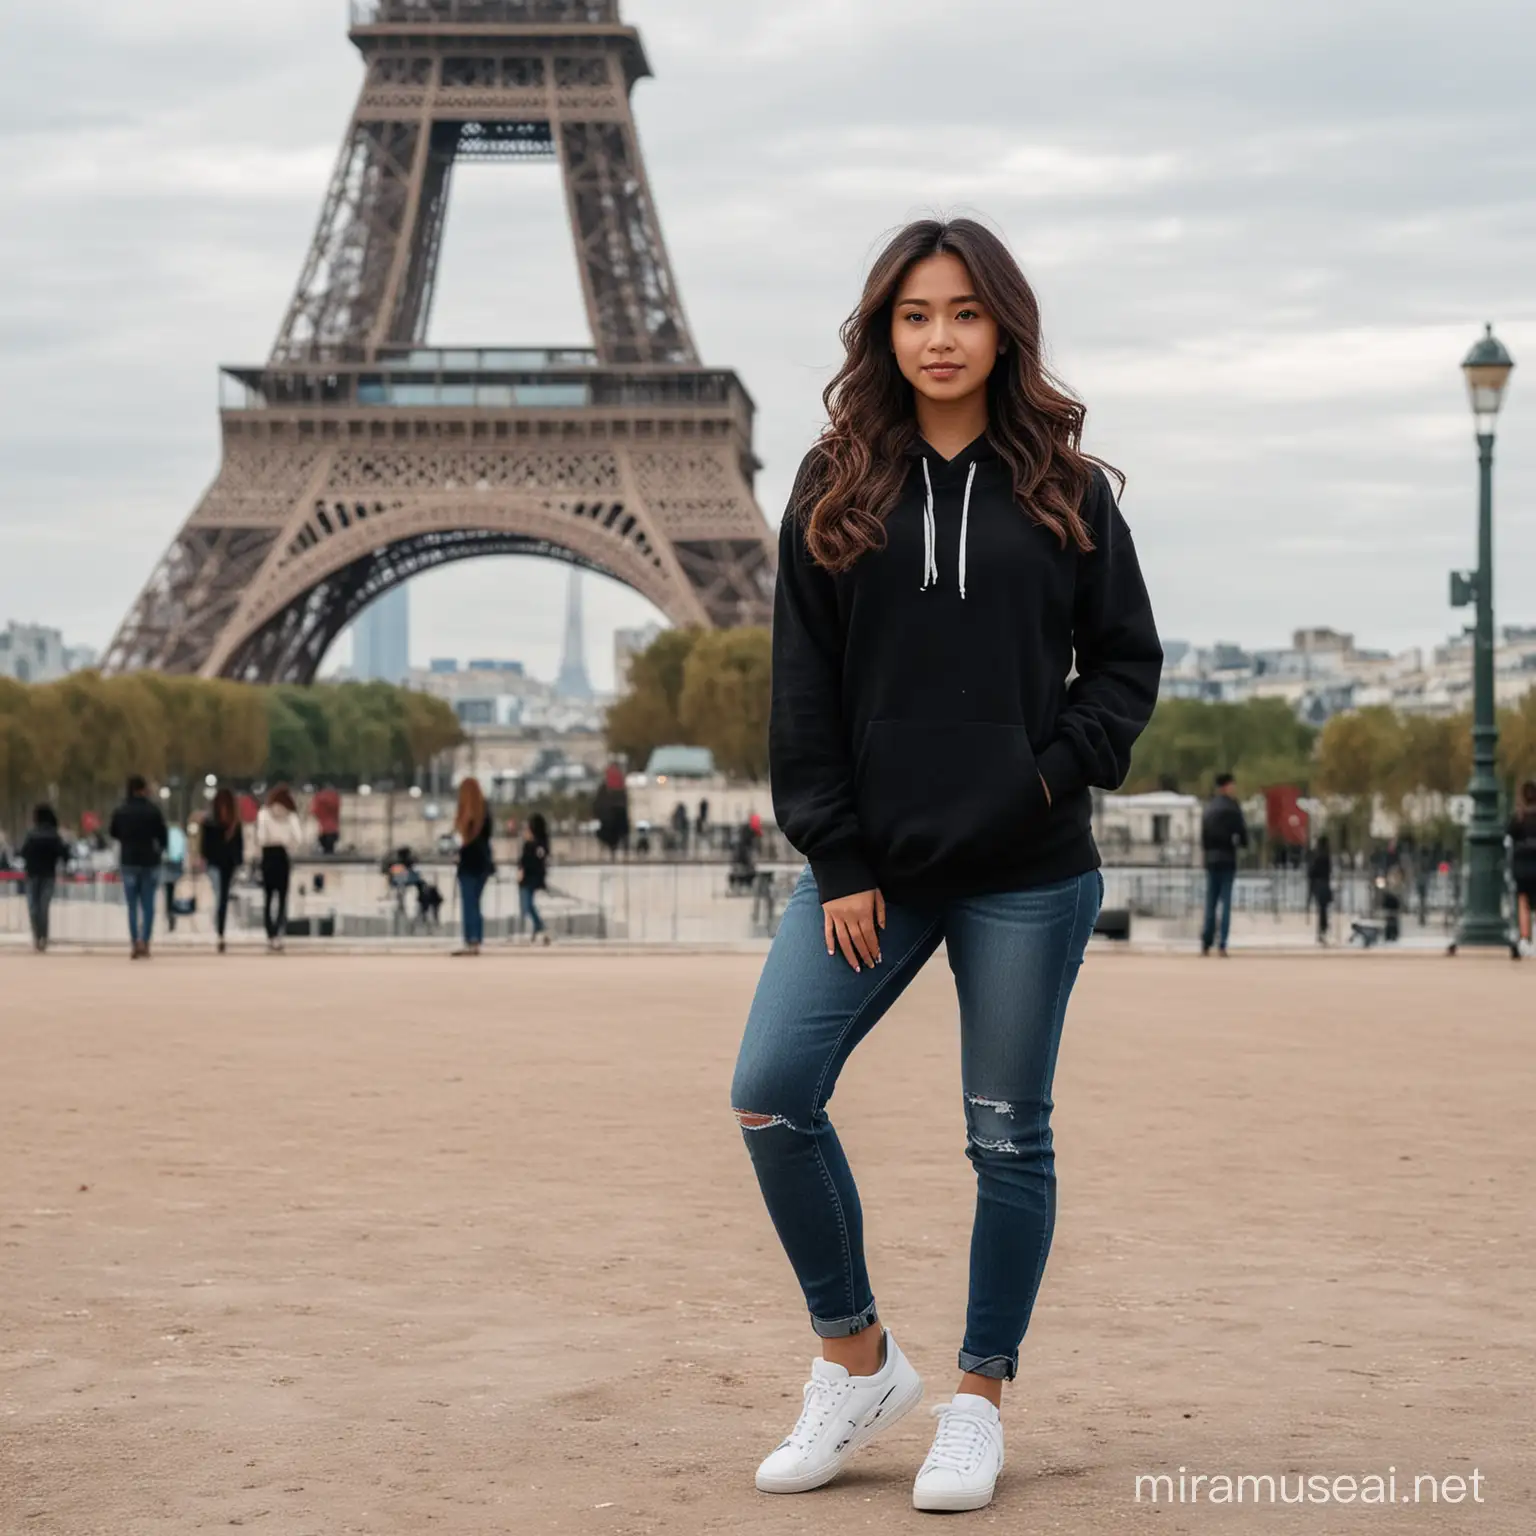 Stylish Indonesian Woman Poses in Front of Paris Eiffel Tower